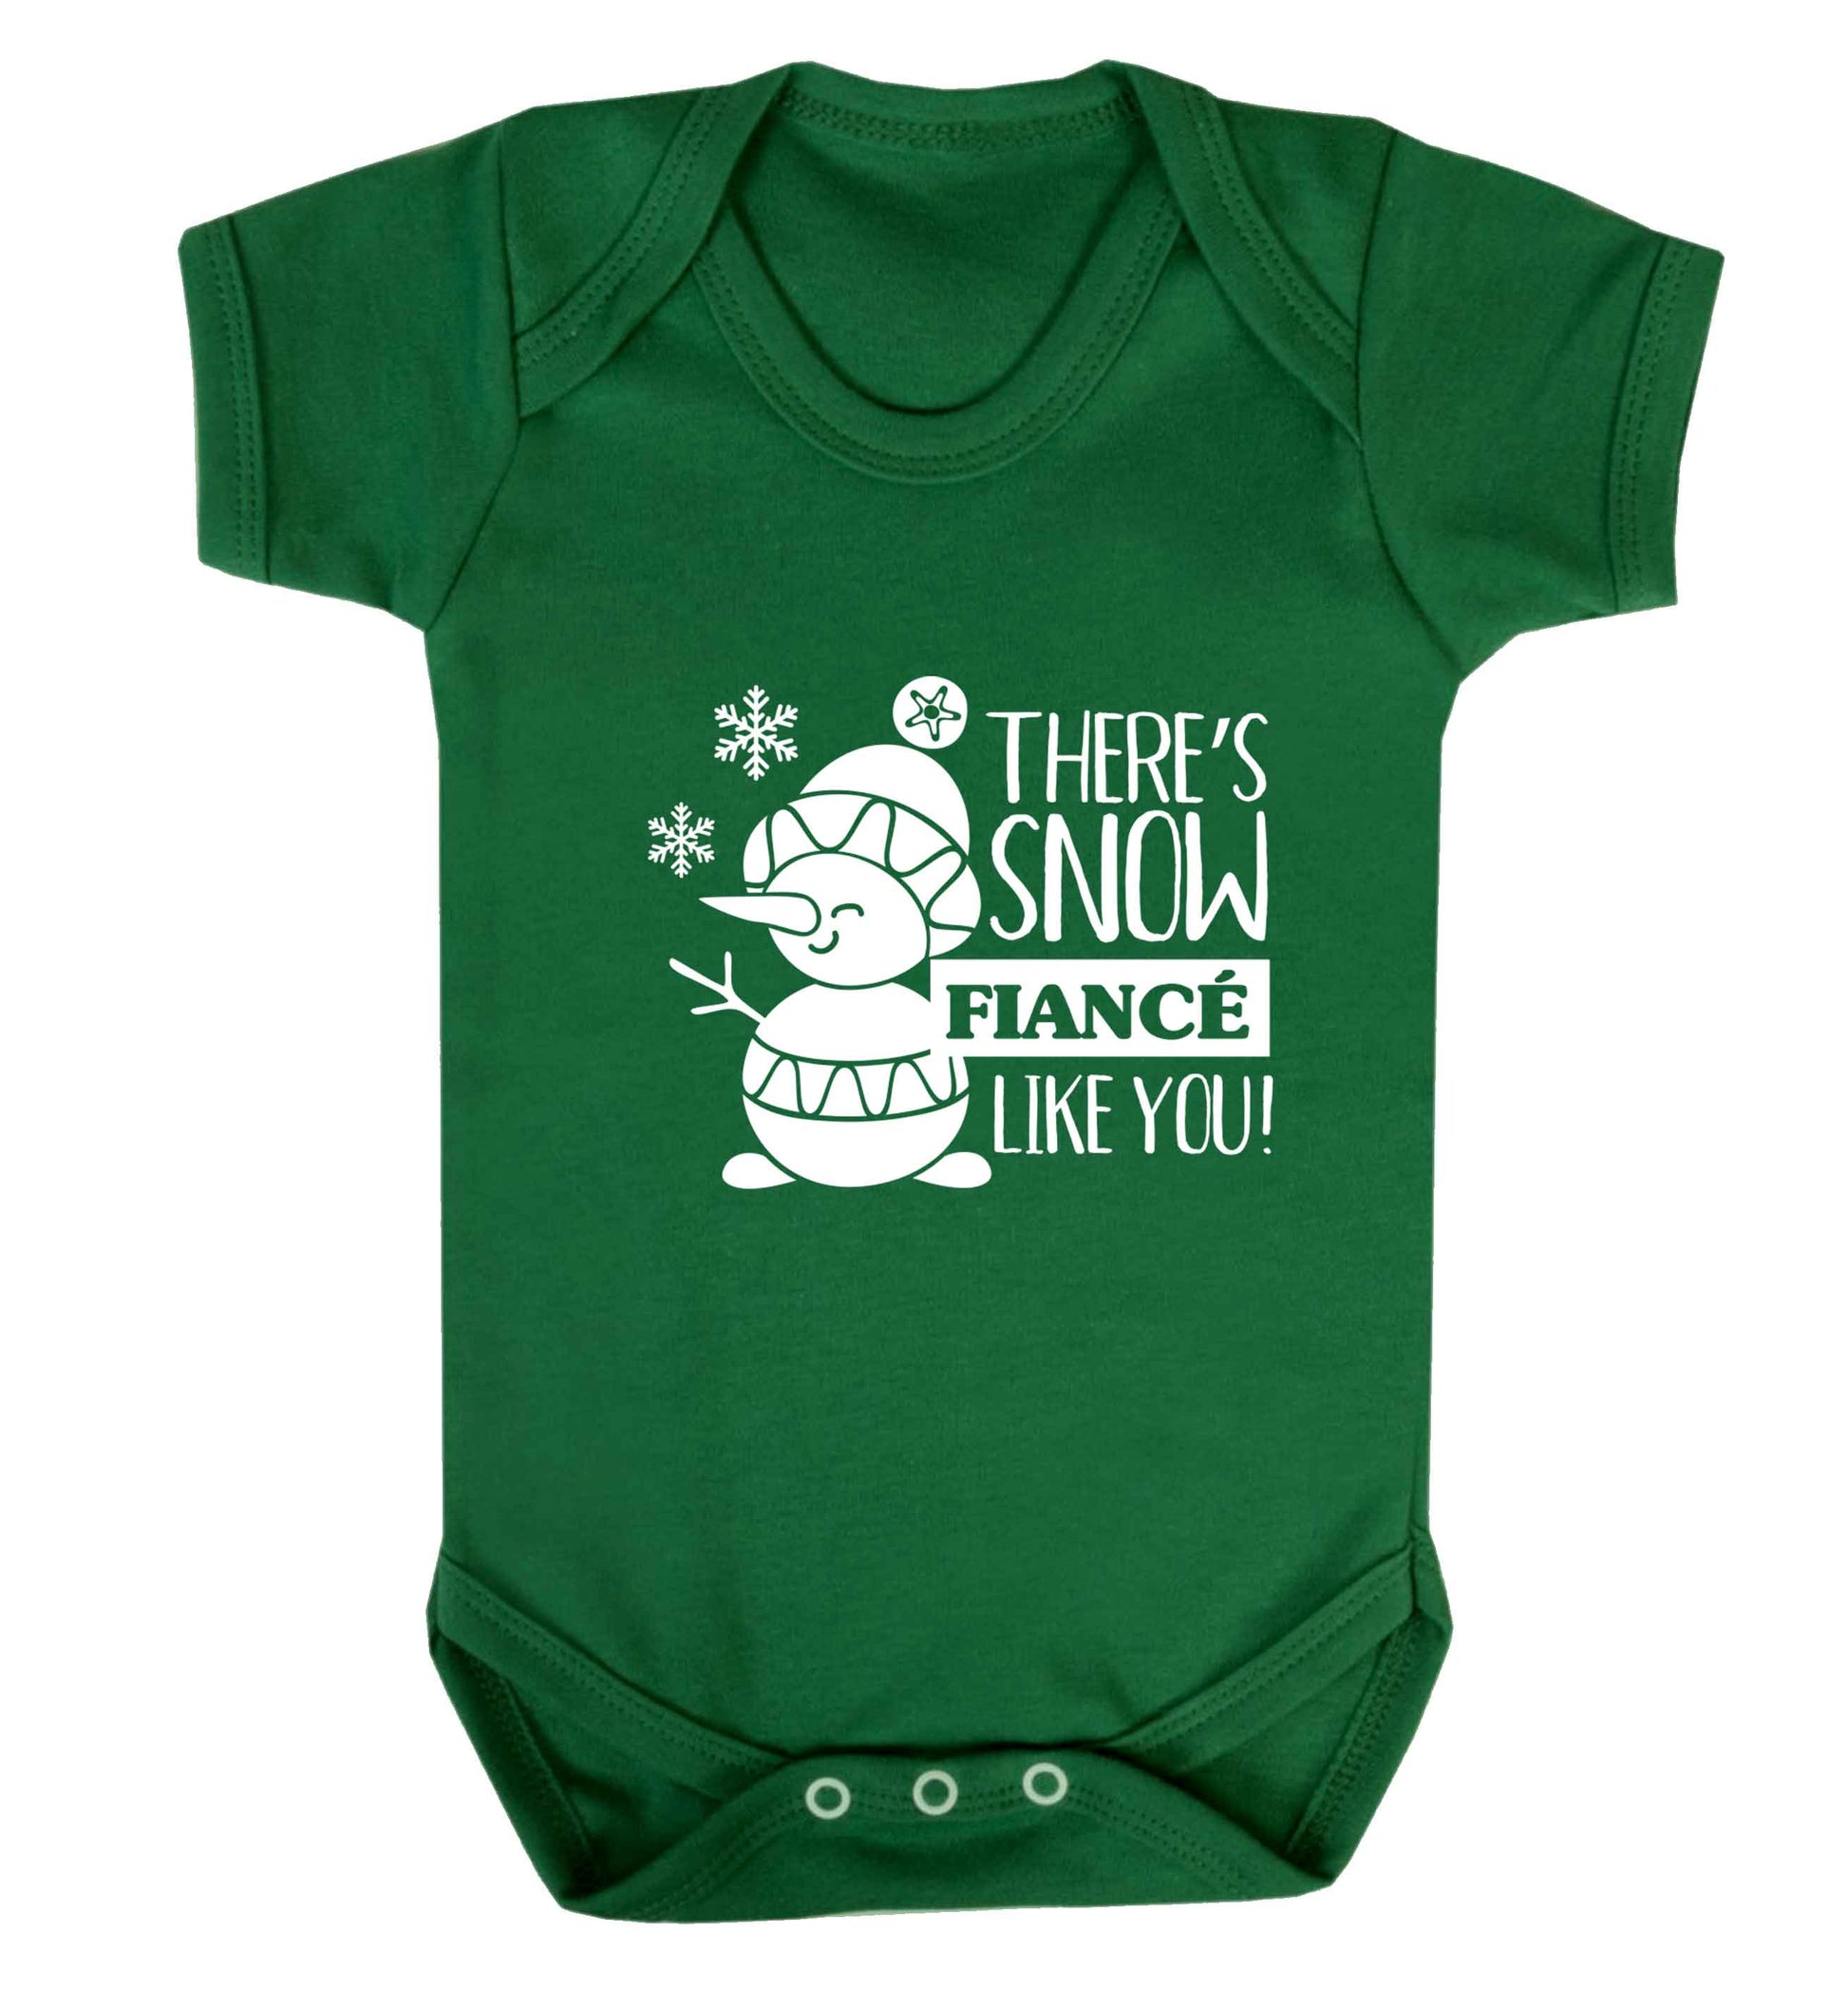 There's snow fiance like you baby vest green 18-24 months